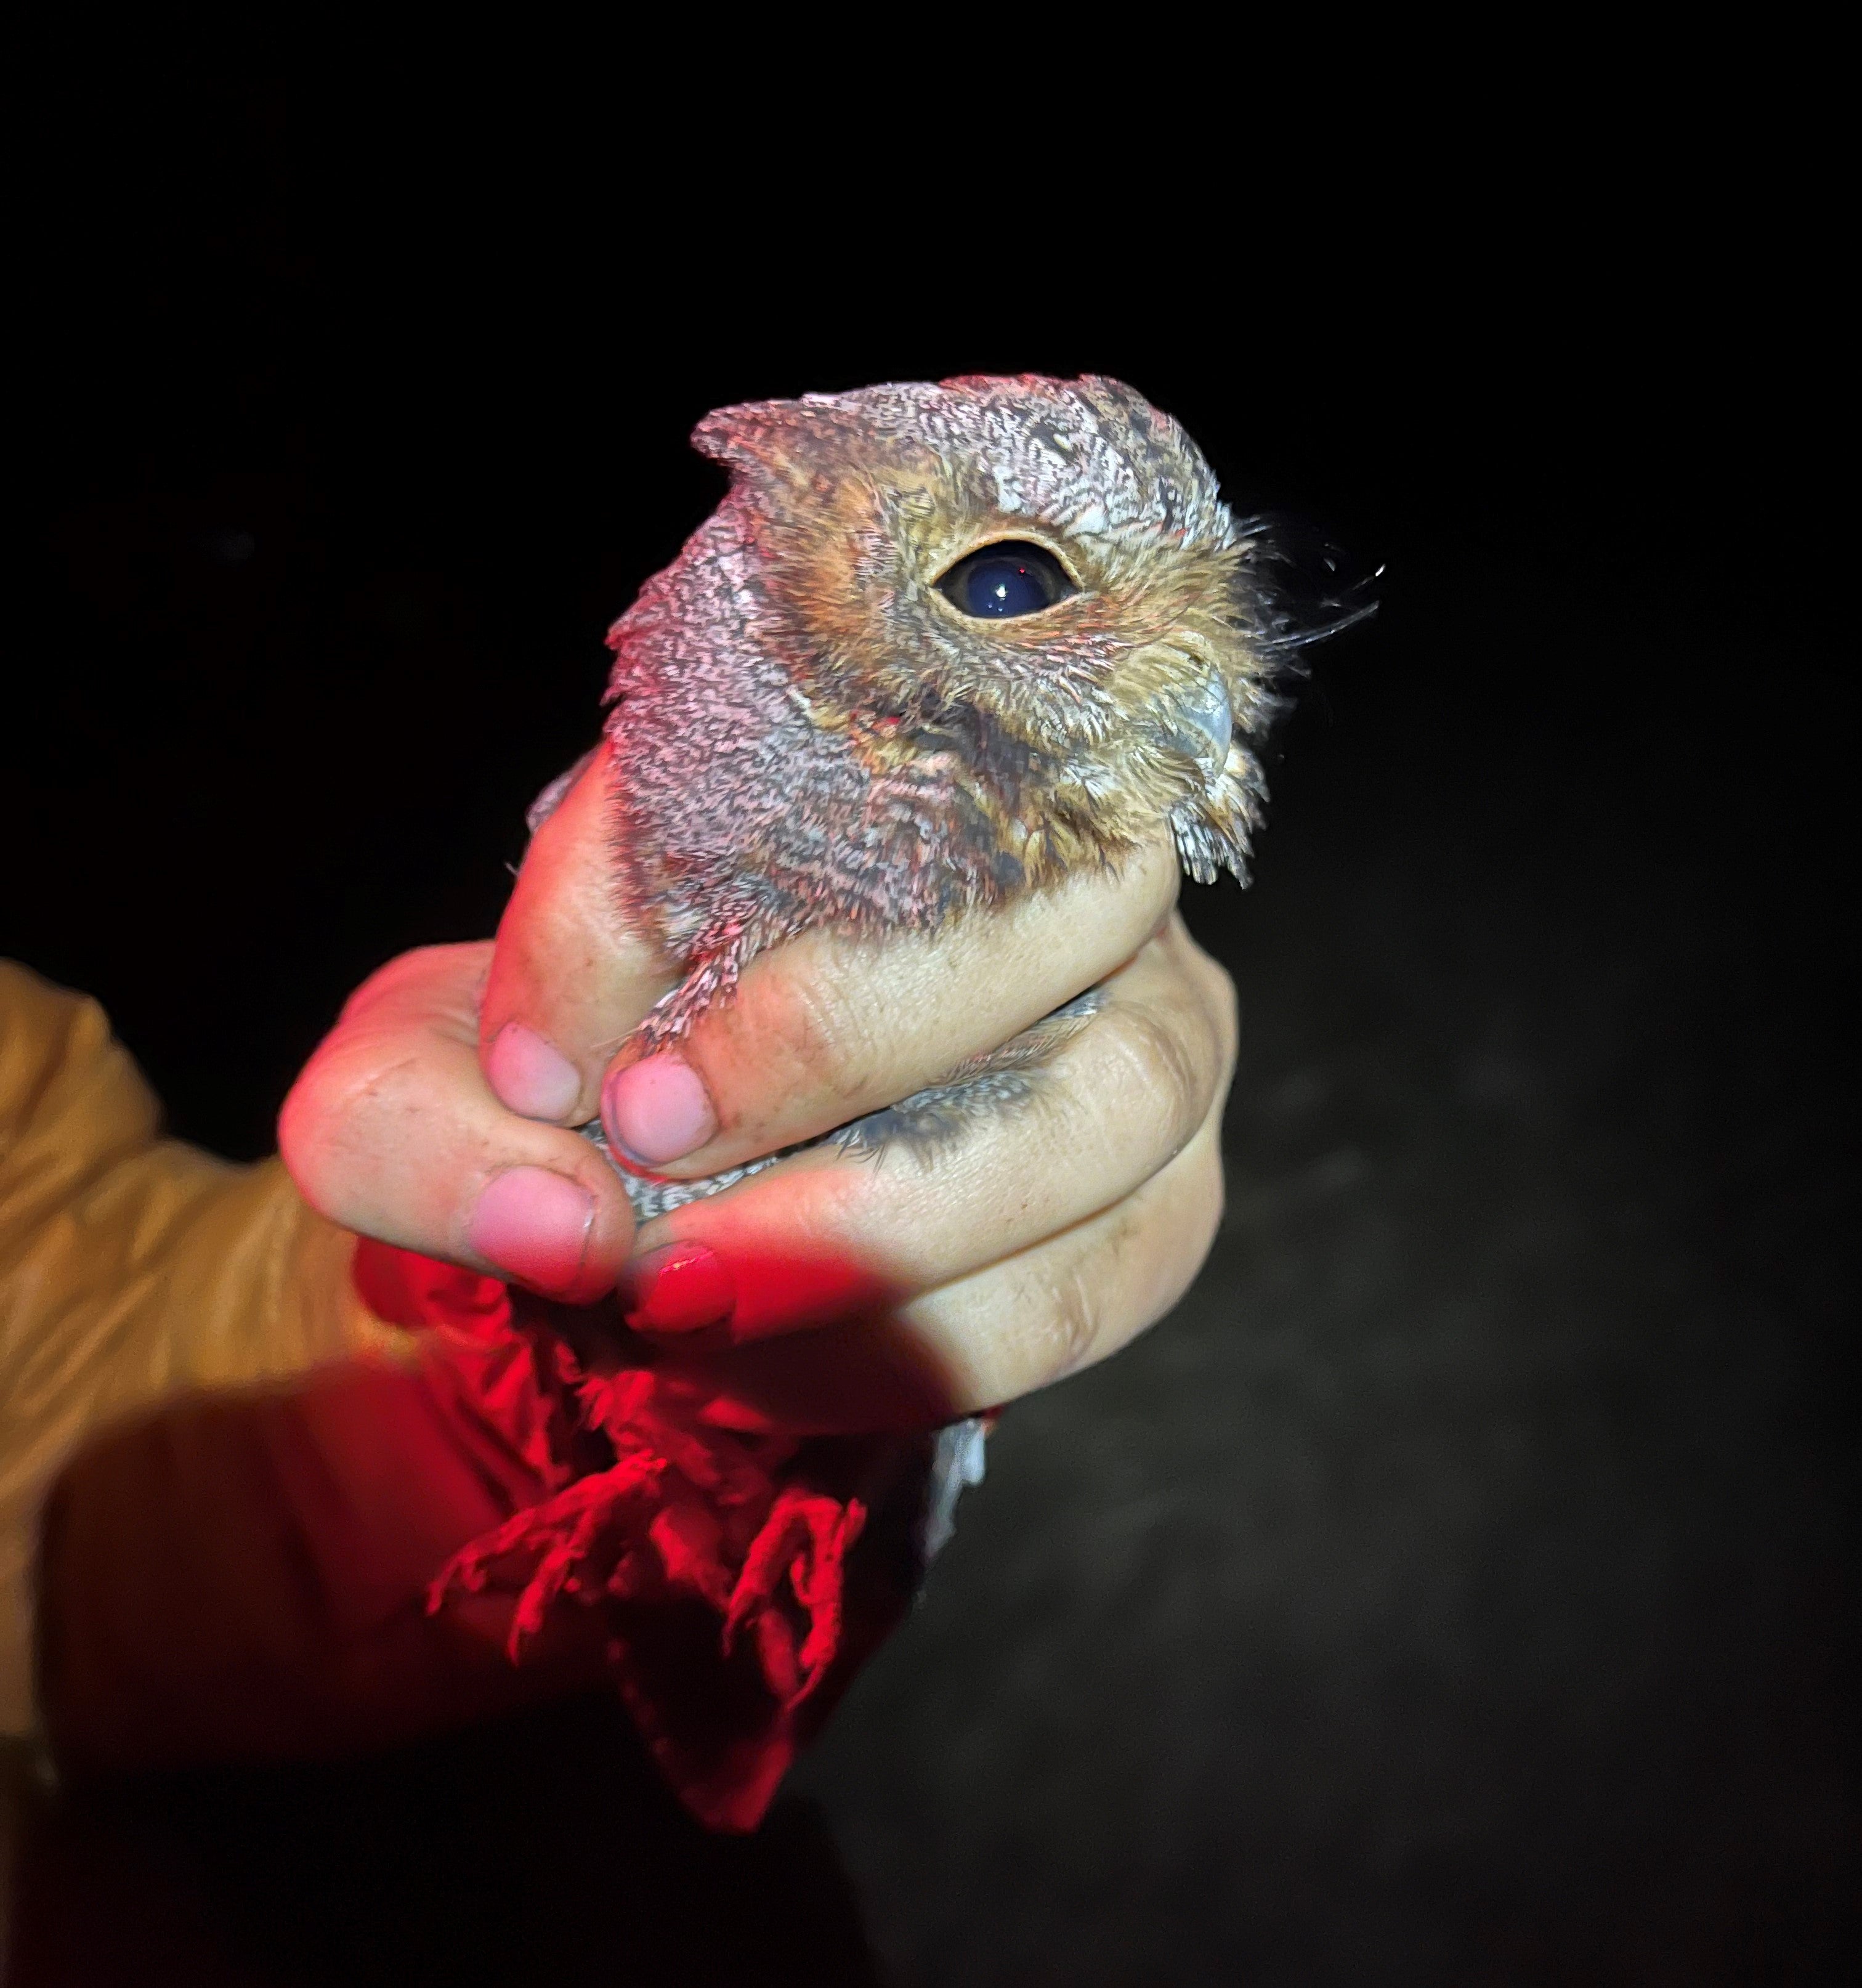 image shows a scientist's hand gently holding a small brown owl looking right